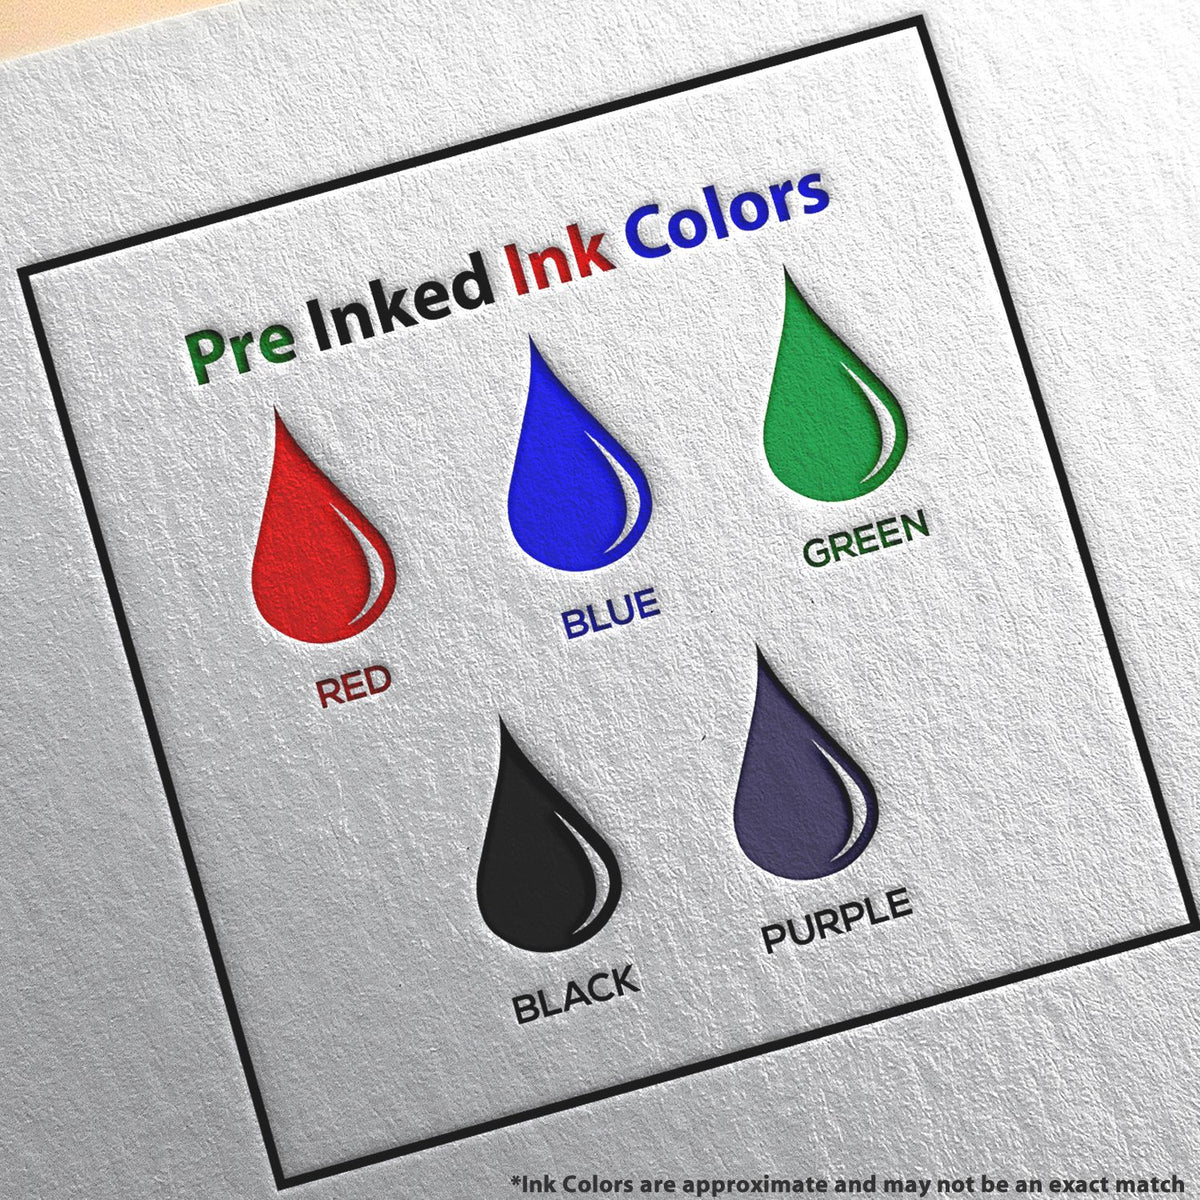 A picture showing the different ink colors or hues available for the PSI Arkansas Notary Stamp product.